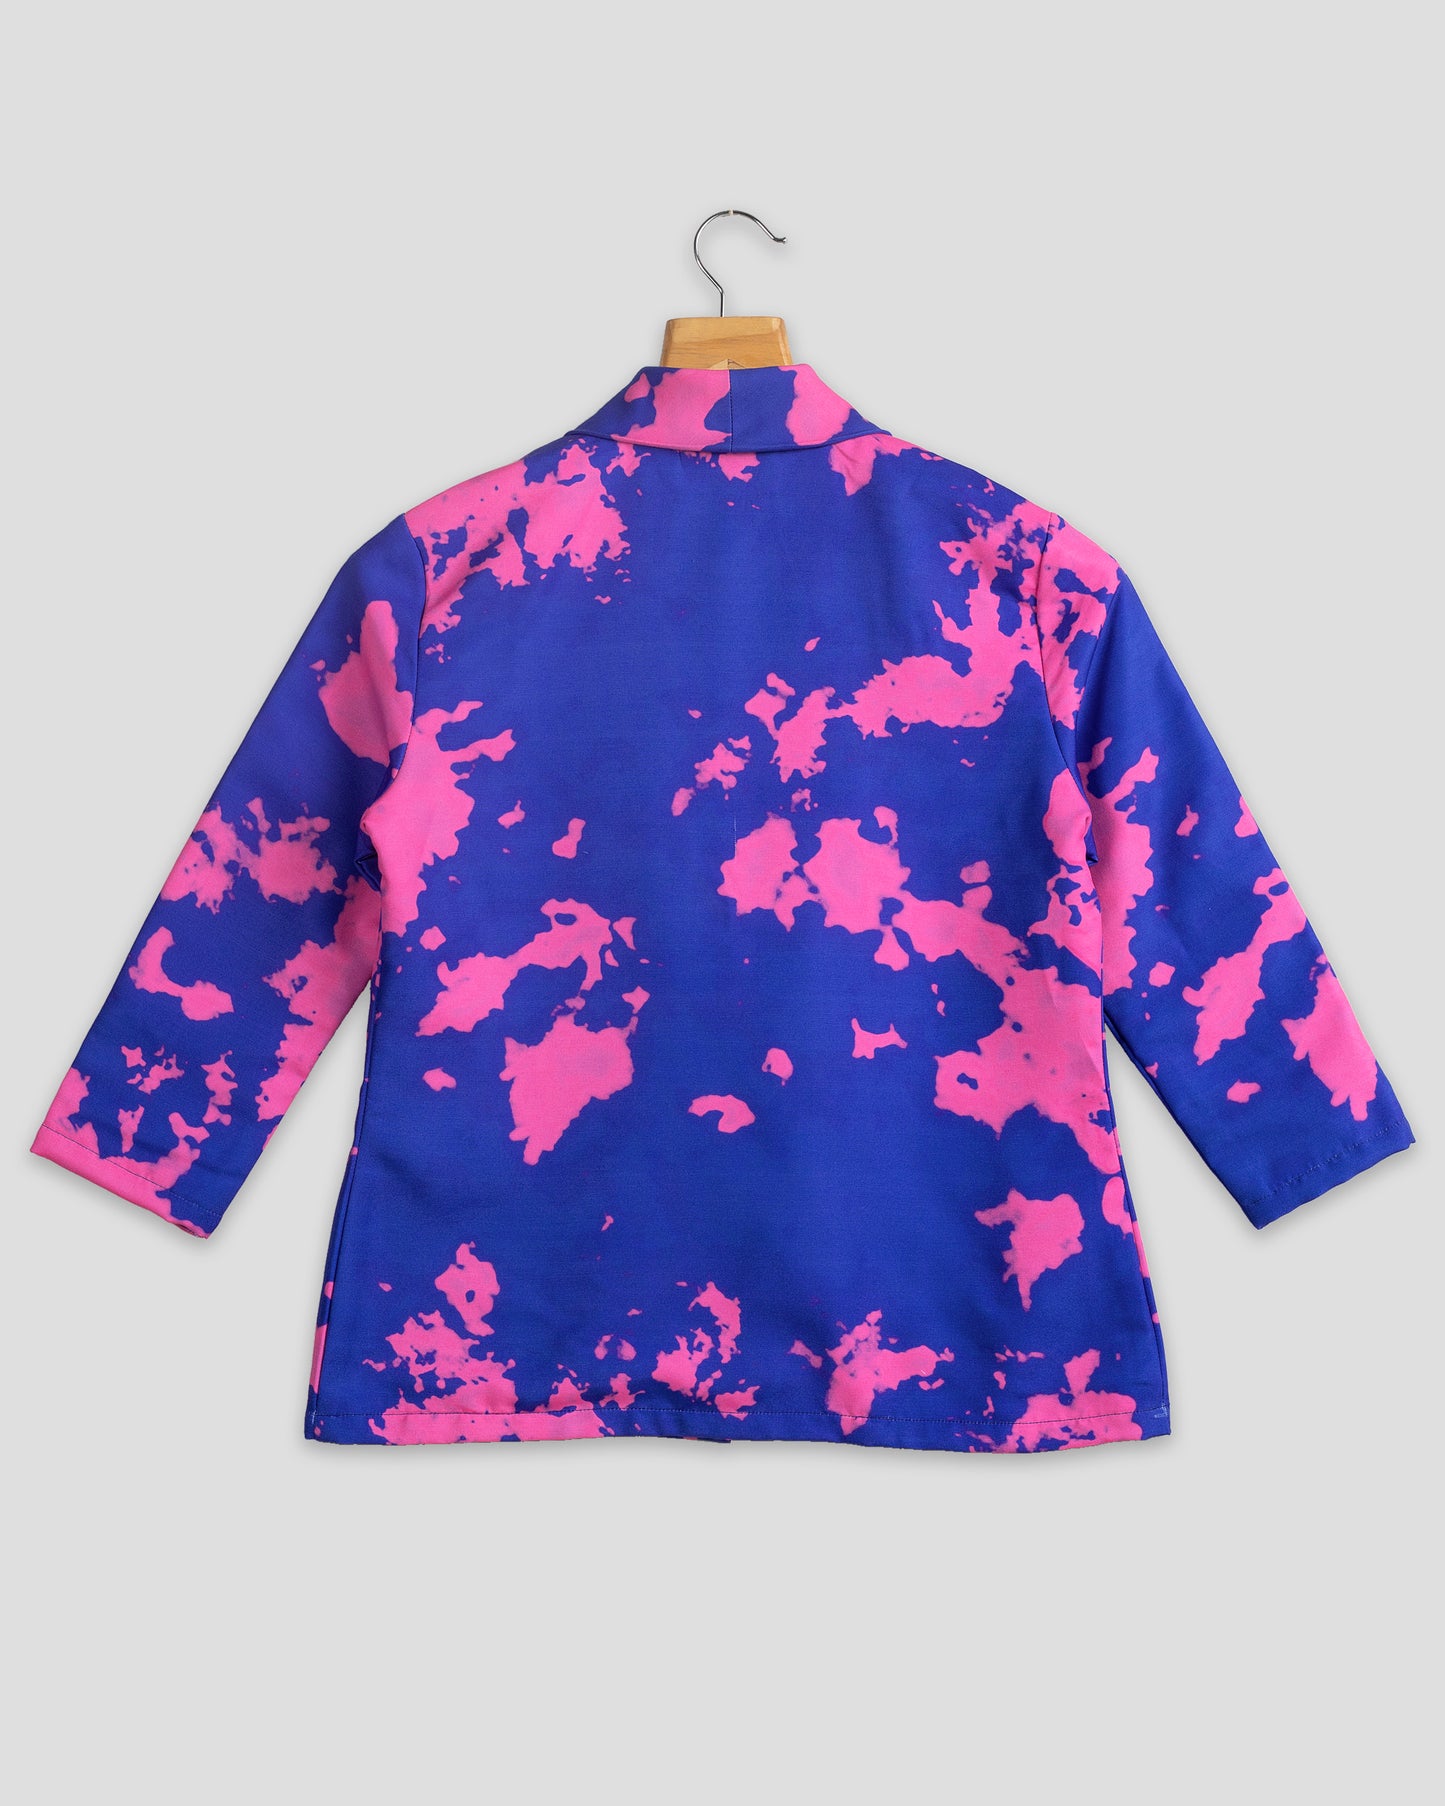 Bestselling Tie And Dye Jacket For Women